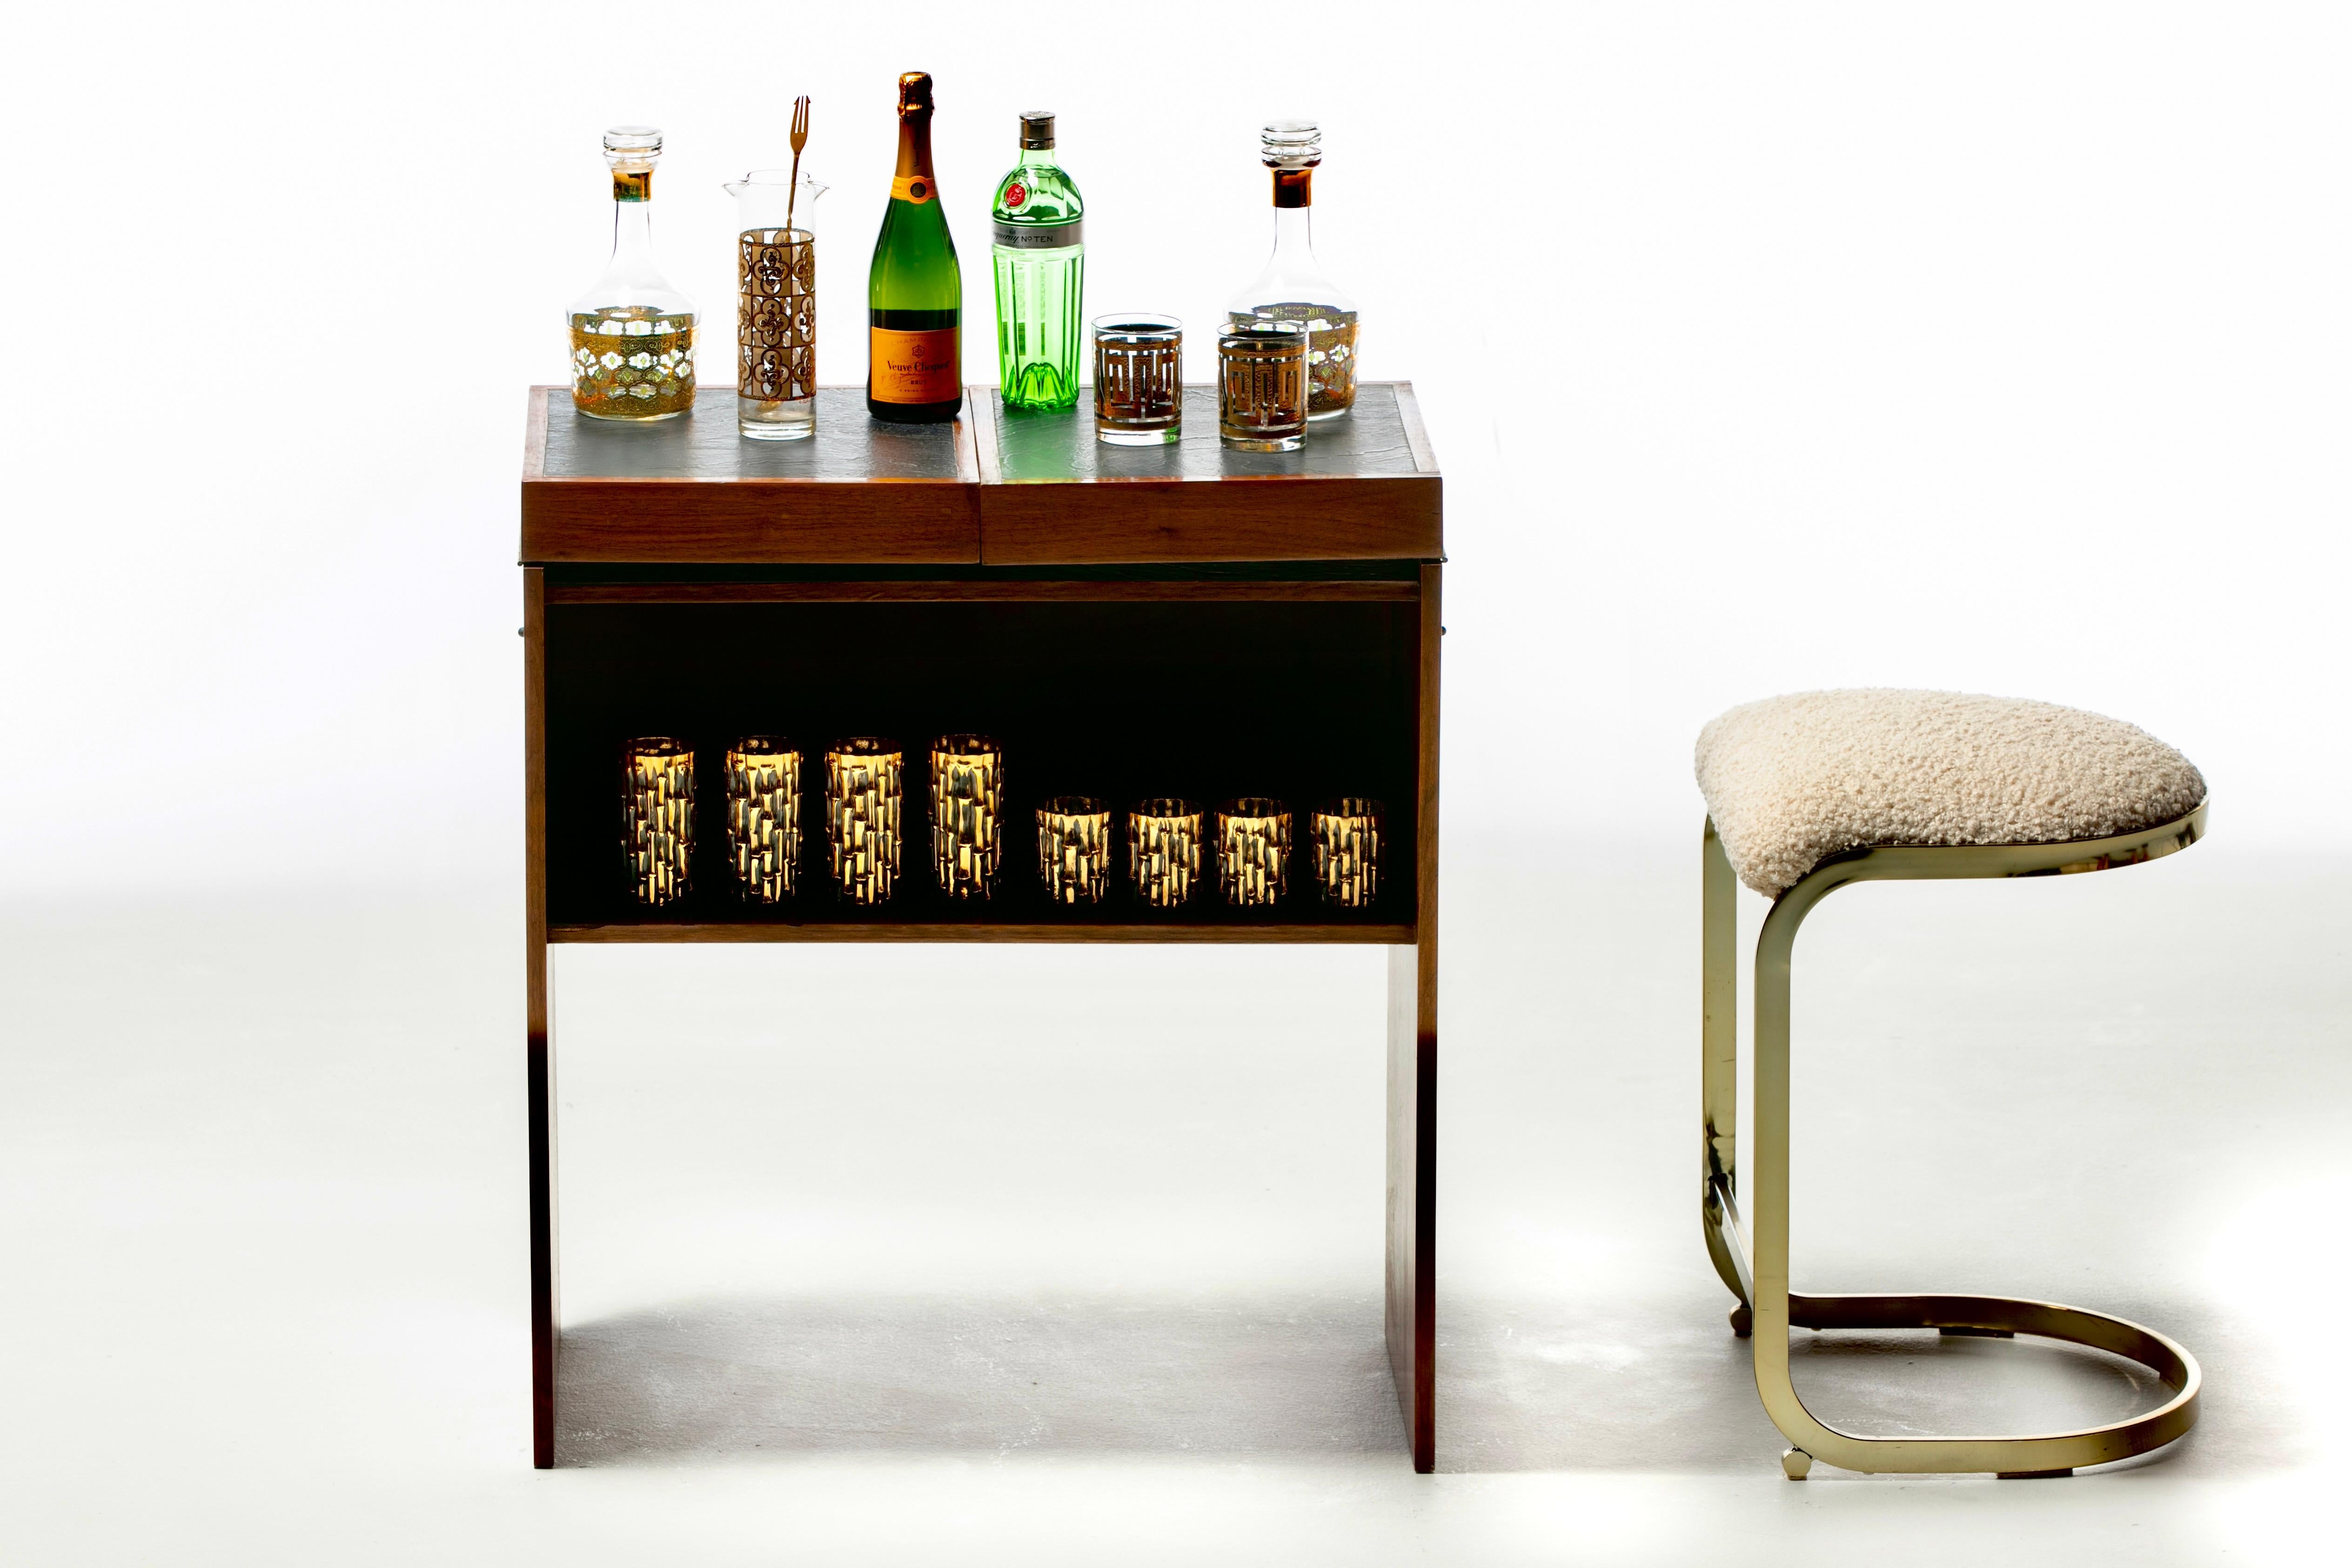 Mid Century Danish Modern 1960s Rosewood Dry Bar goes from proper to party in just two flips. When not in use, the bar is understated and unassuming in keeping with Danish Modern style. When the clock strikes Cocktail Hour, it easily transforms into